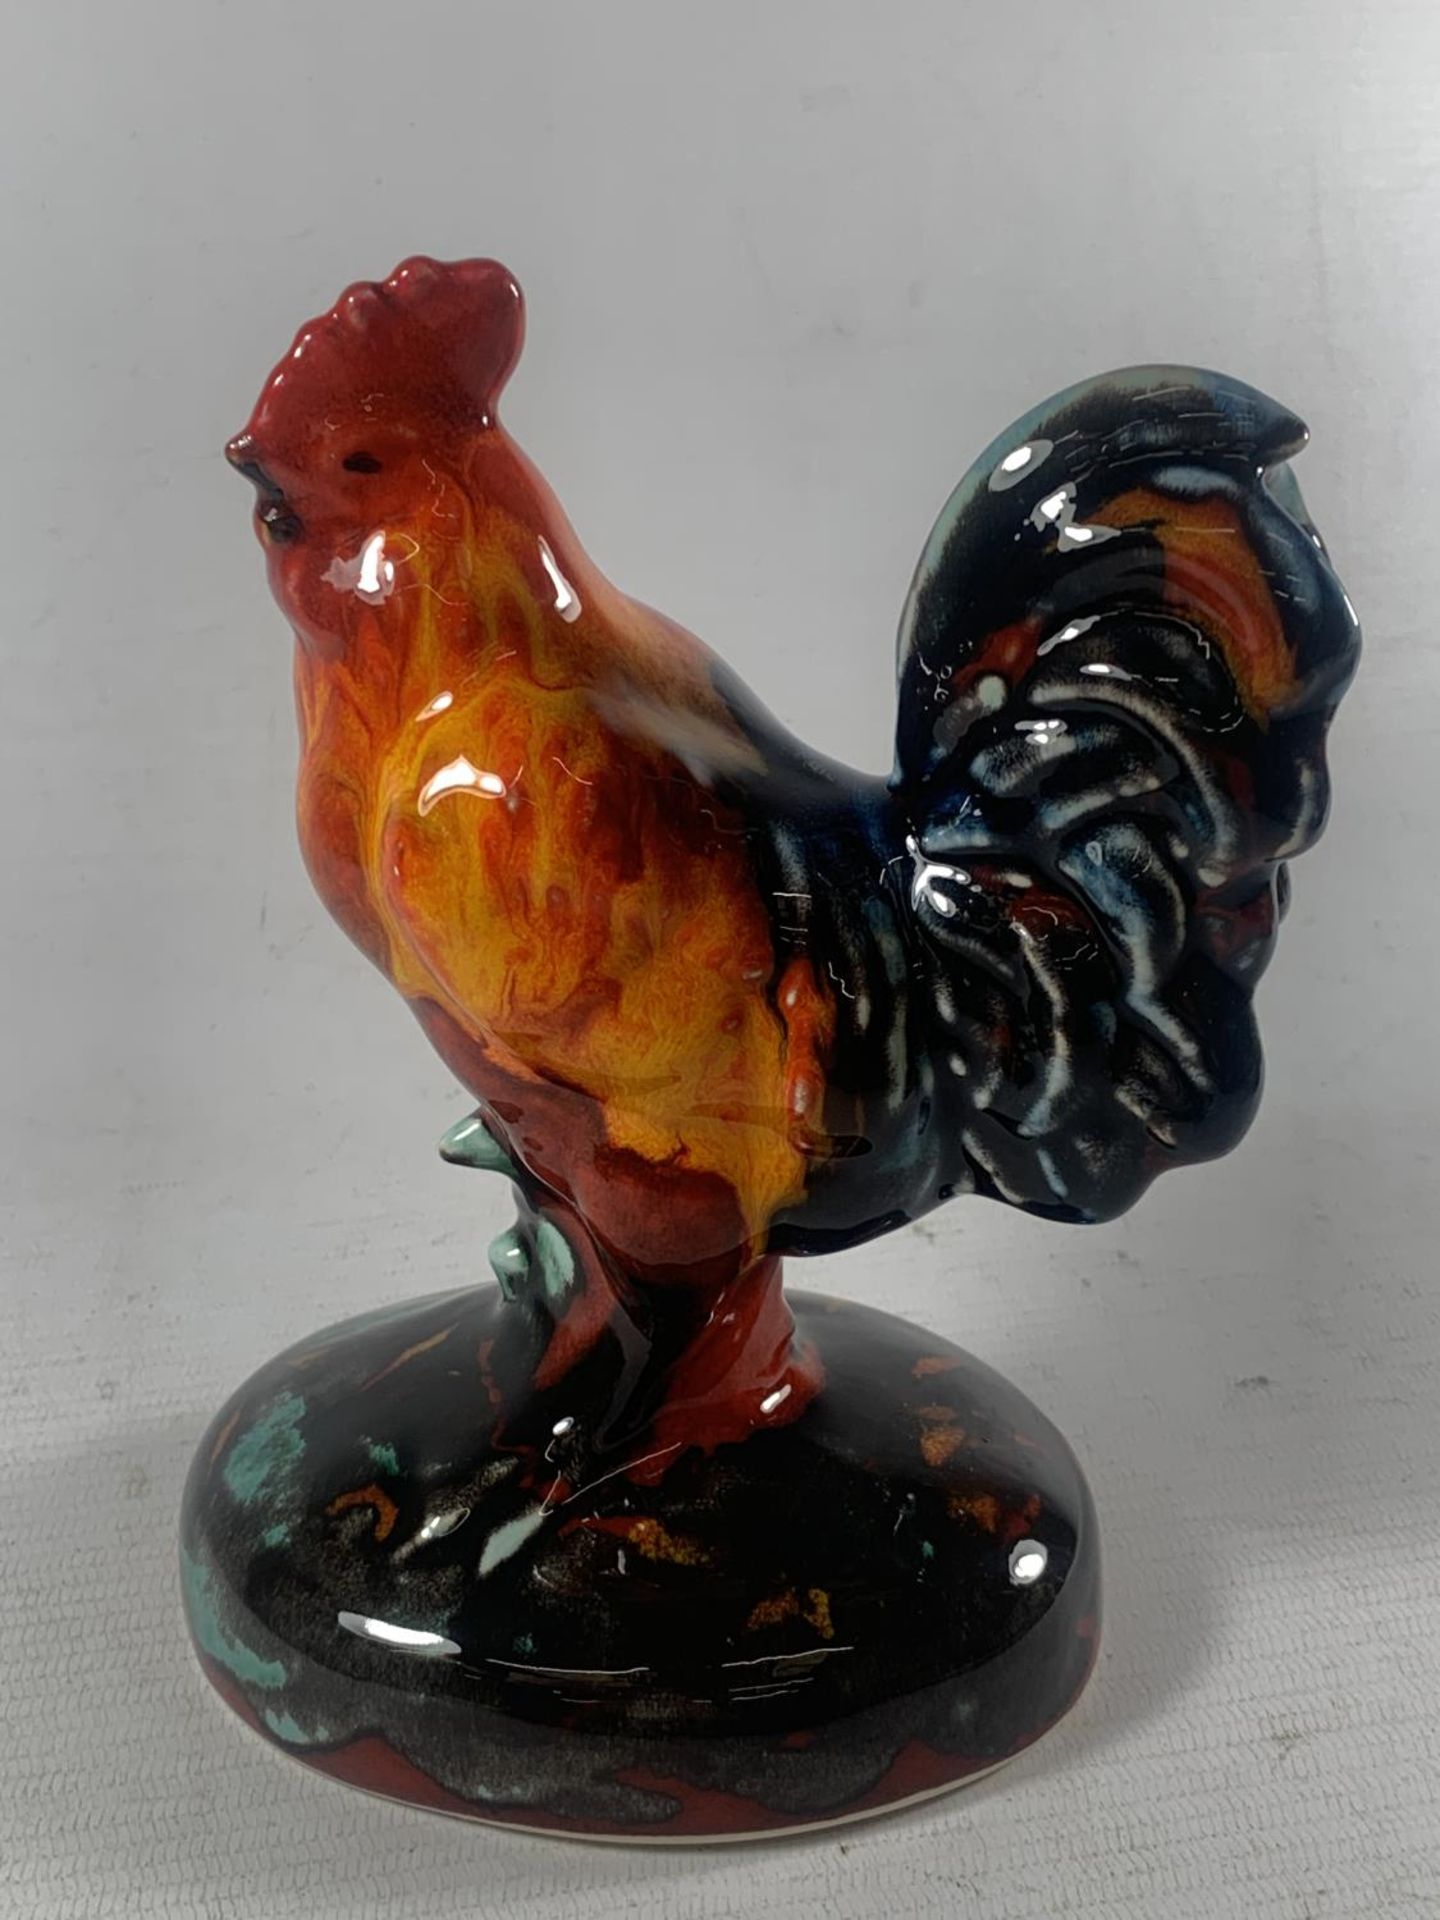 AN ANITA HARRIS HAND PAINTED AND SIGNED IN GOLD FIGURE OF A COCKEREL